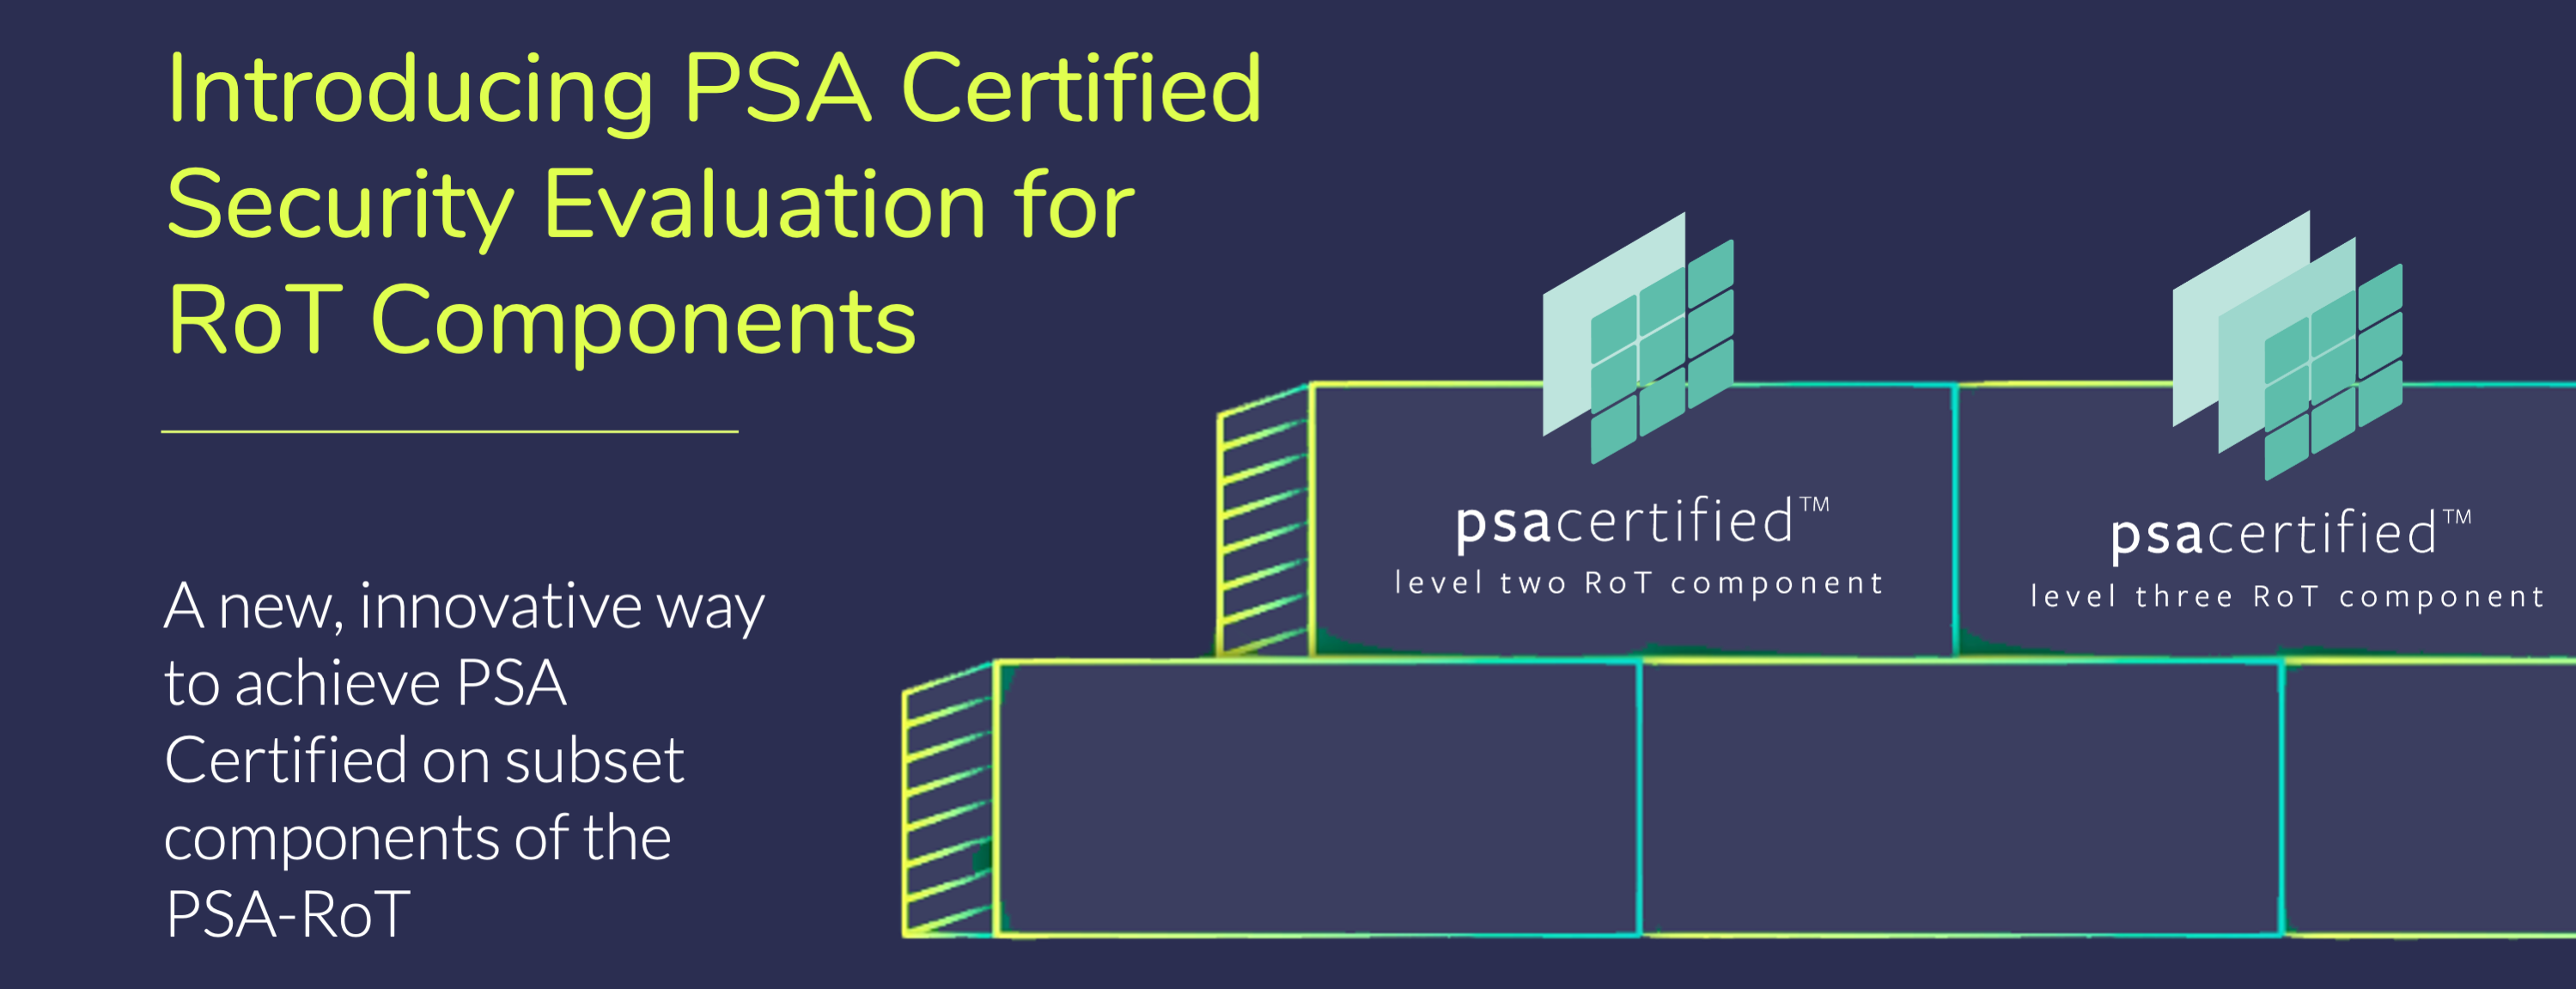 Introducing security evaluation for RoT components with PSA Certified